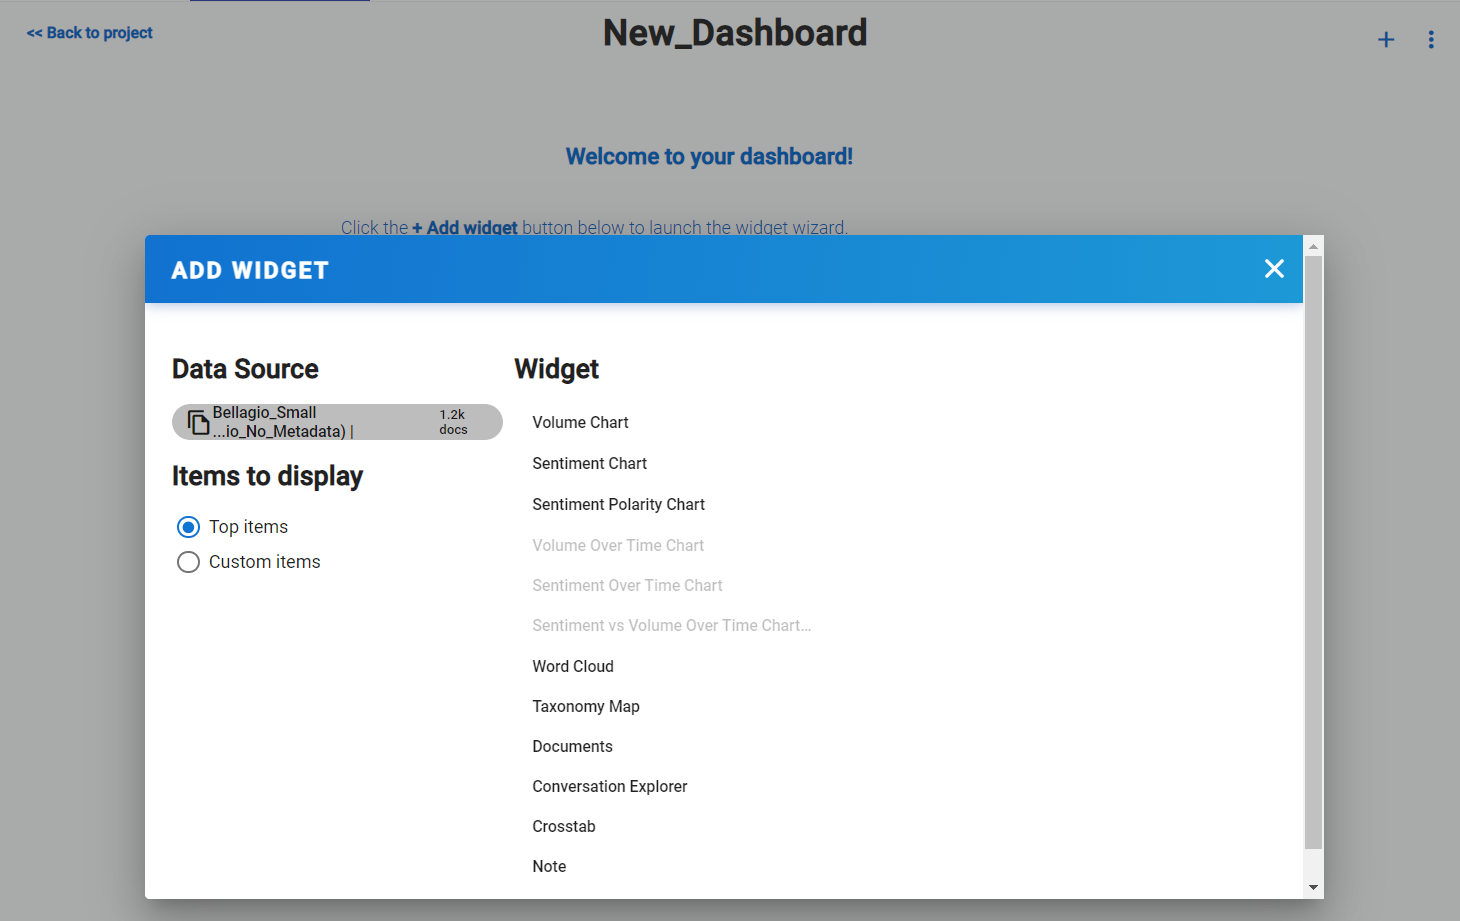 Creating a new dashboard will automatically open the Add Widget panel